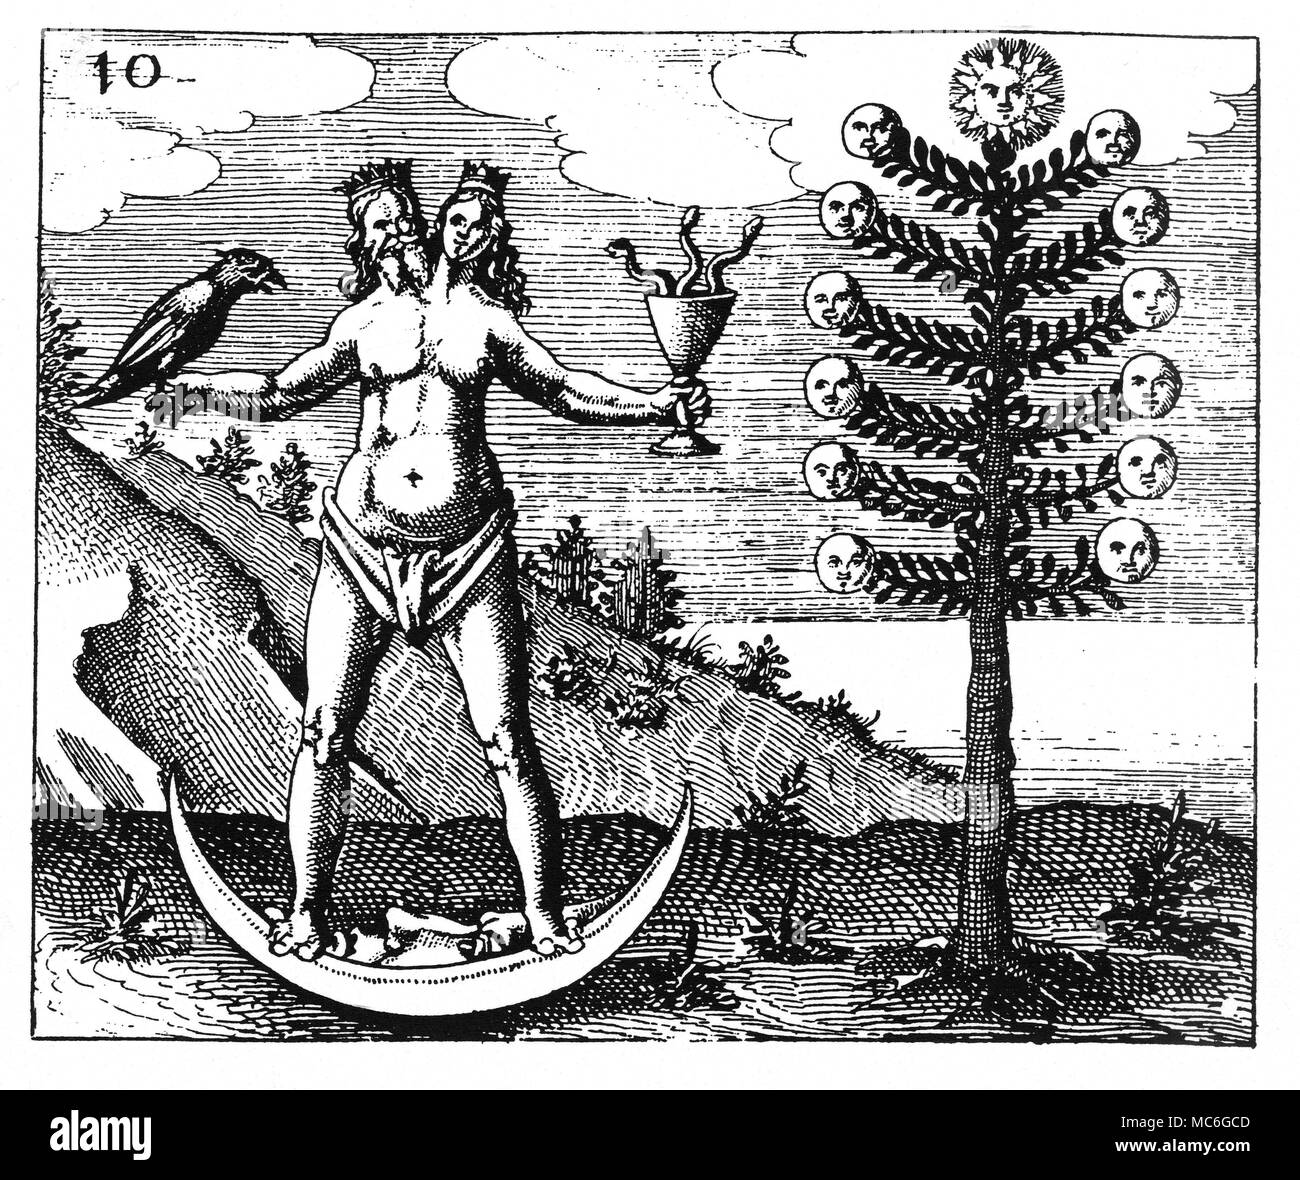 ALCHEMY - TREE OF THE MOON - HERMAPHRODITE Engraving from Johann Daniel Mylius, Philosophia Reformata, 1622. The Tree of the Moon or the Arbor Argentum, and the fact that the hermaphrodite s tands on a crescent Moon, indicates that this stage in the alchemical process marks the perfection of what is called the First Silver. The Hermaphrodite figure, of the merged king and queen indicates that the process is not yet complete, as integration has not taken place. Stock Photo